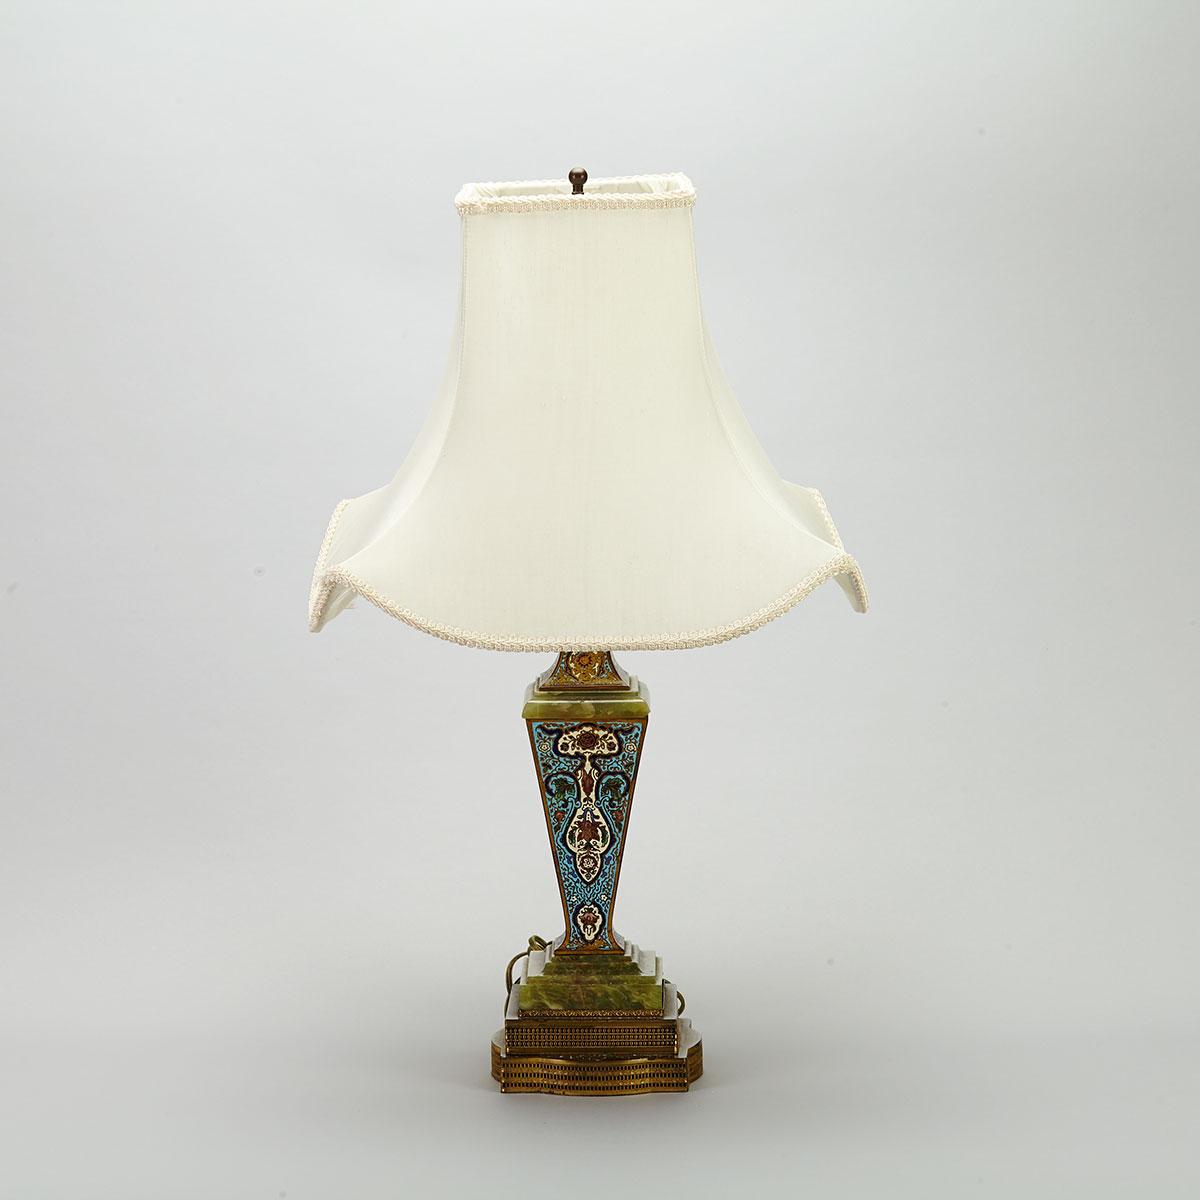 French Champleve Enamelled and Onyx Baluster Form Table Lamp, early 20th century